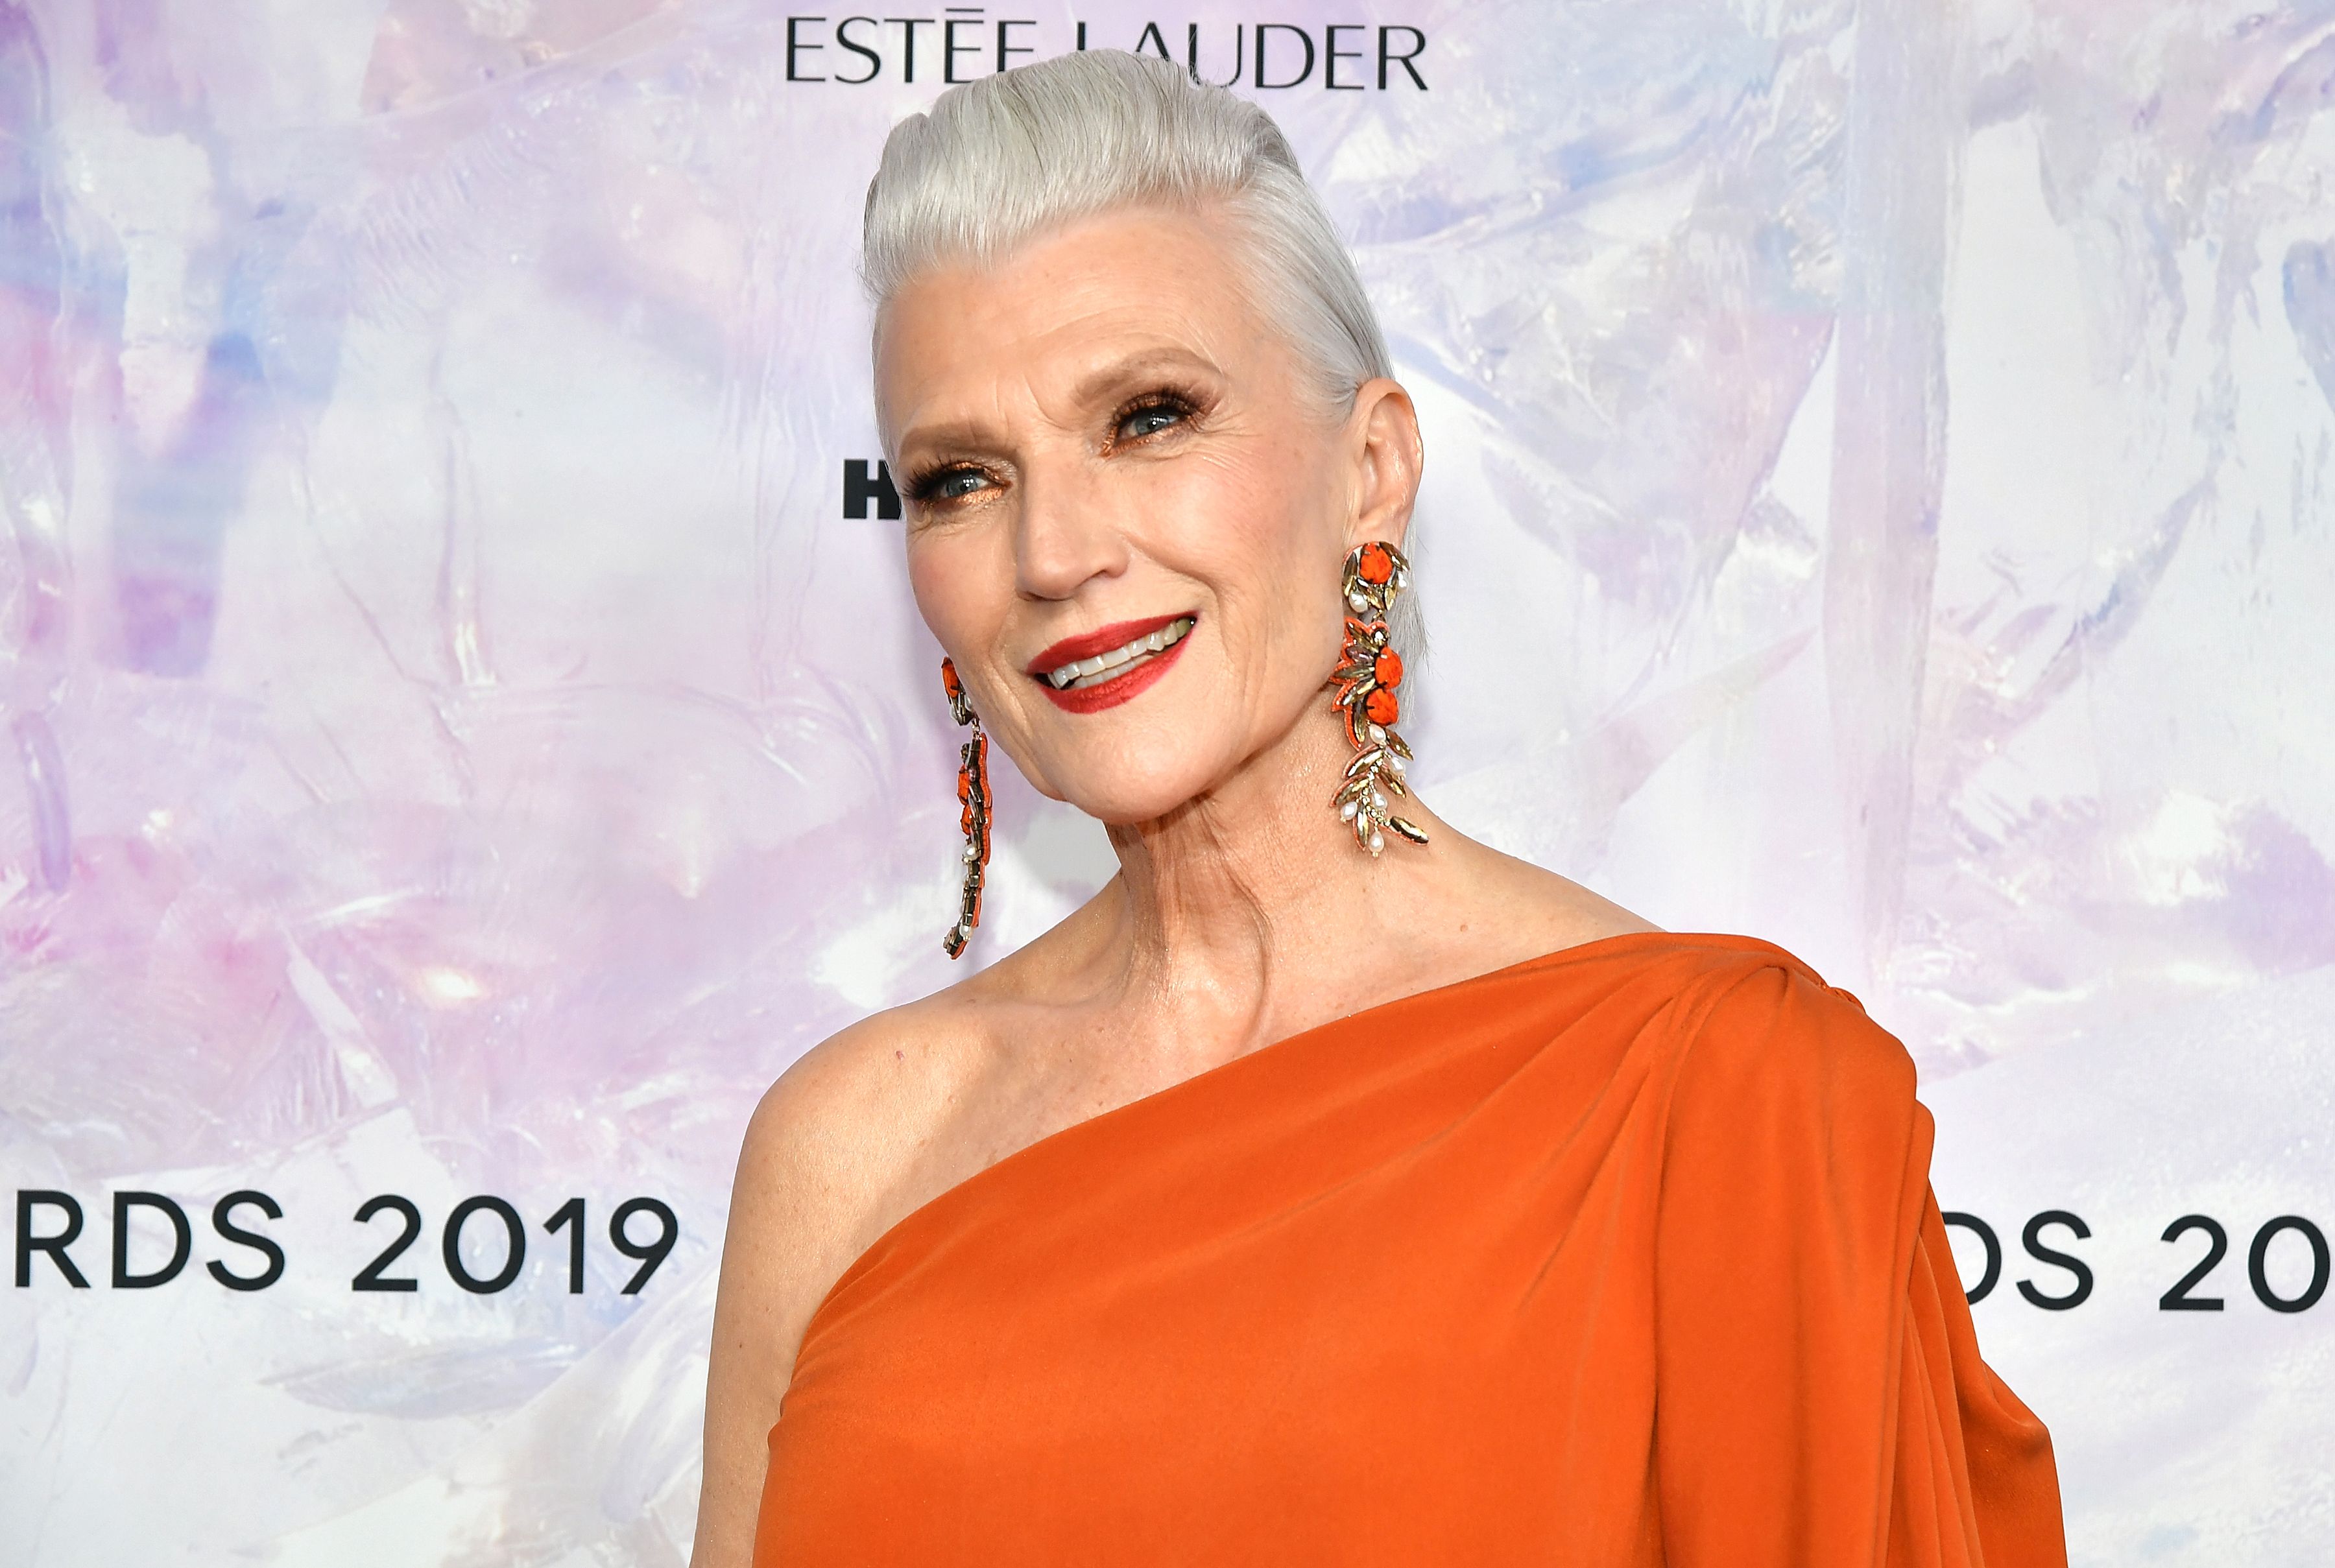 Maye Musk during the 2019 Fragrance Foundation Awards at David H. Koch Theater, Lincoln Center on June 5, 2019 in New York City. | Source: Getty Images